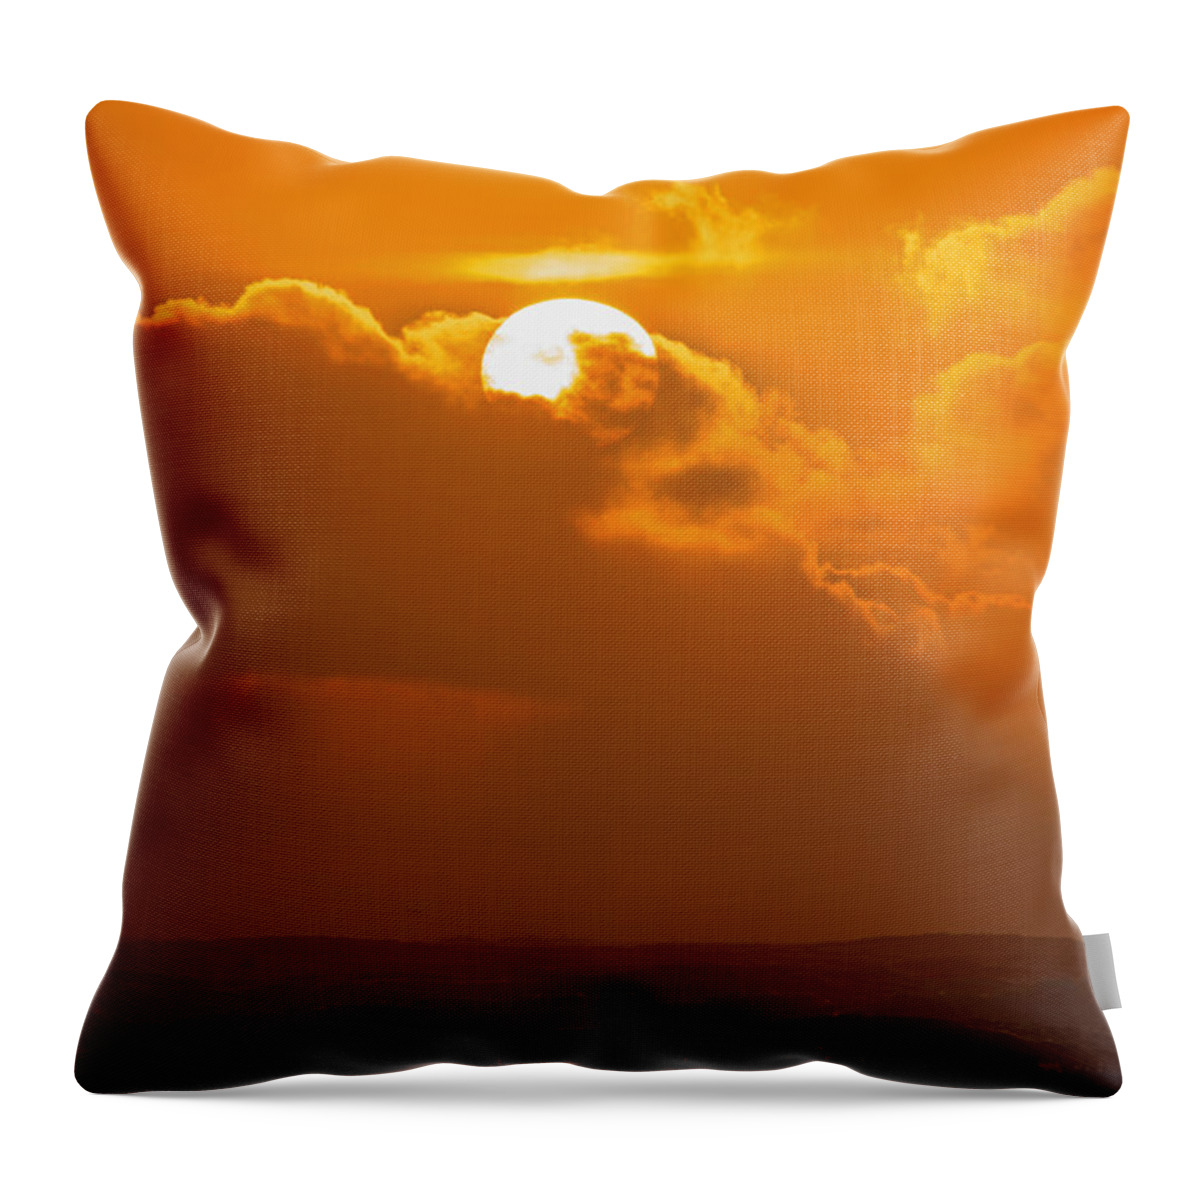 Pacific Storm Throw Pillow featuring the photograph Pacific Storm by Tikvah's Hope